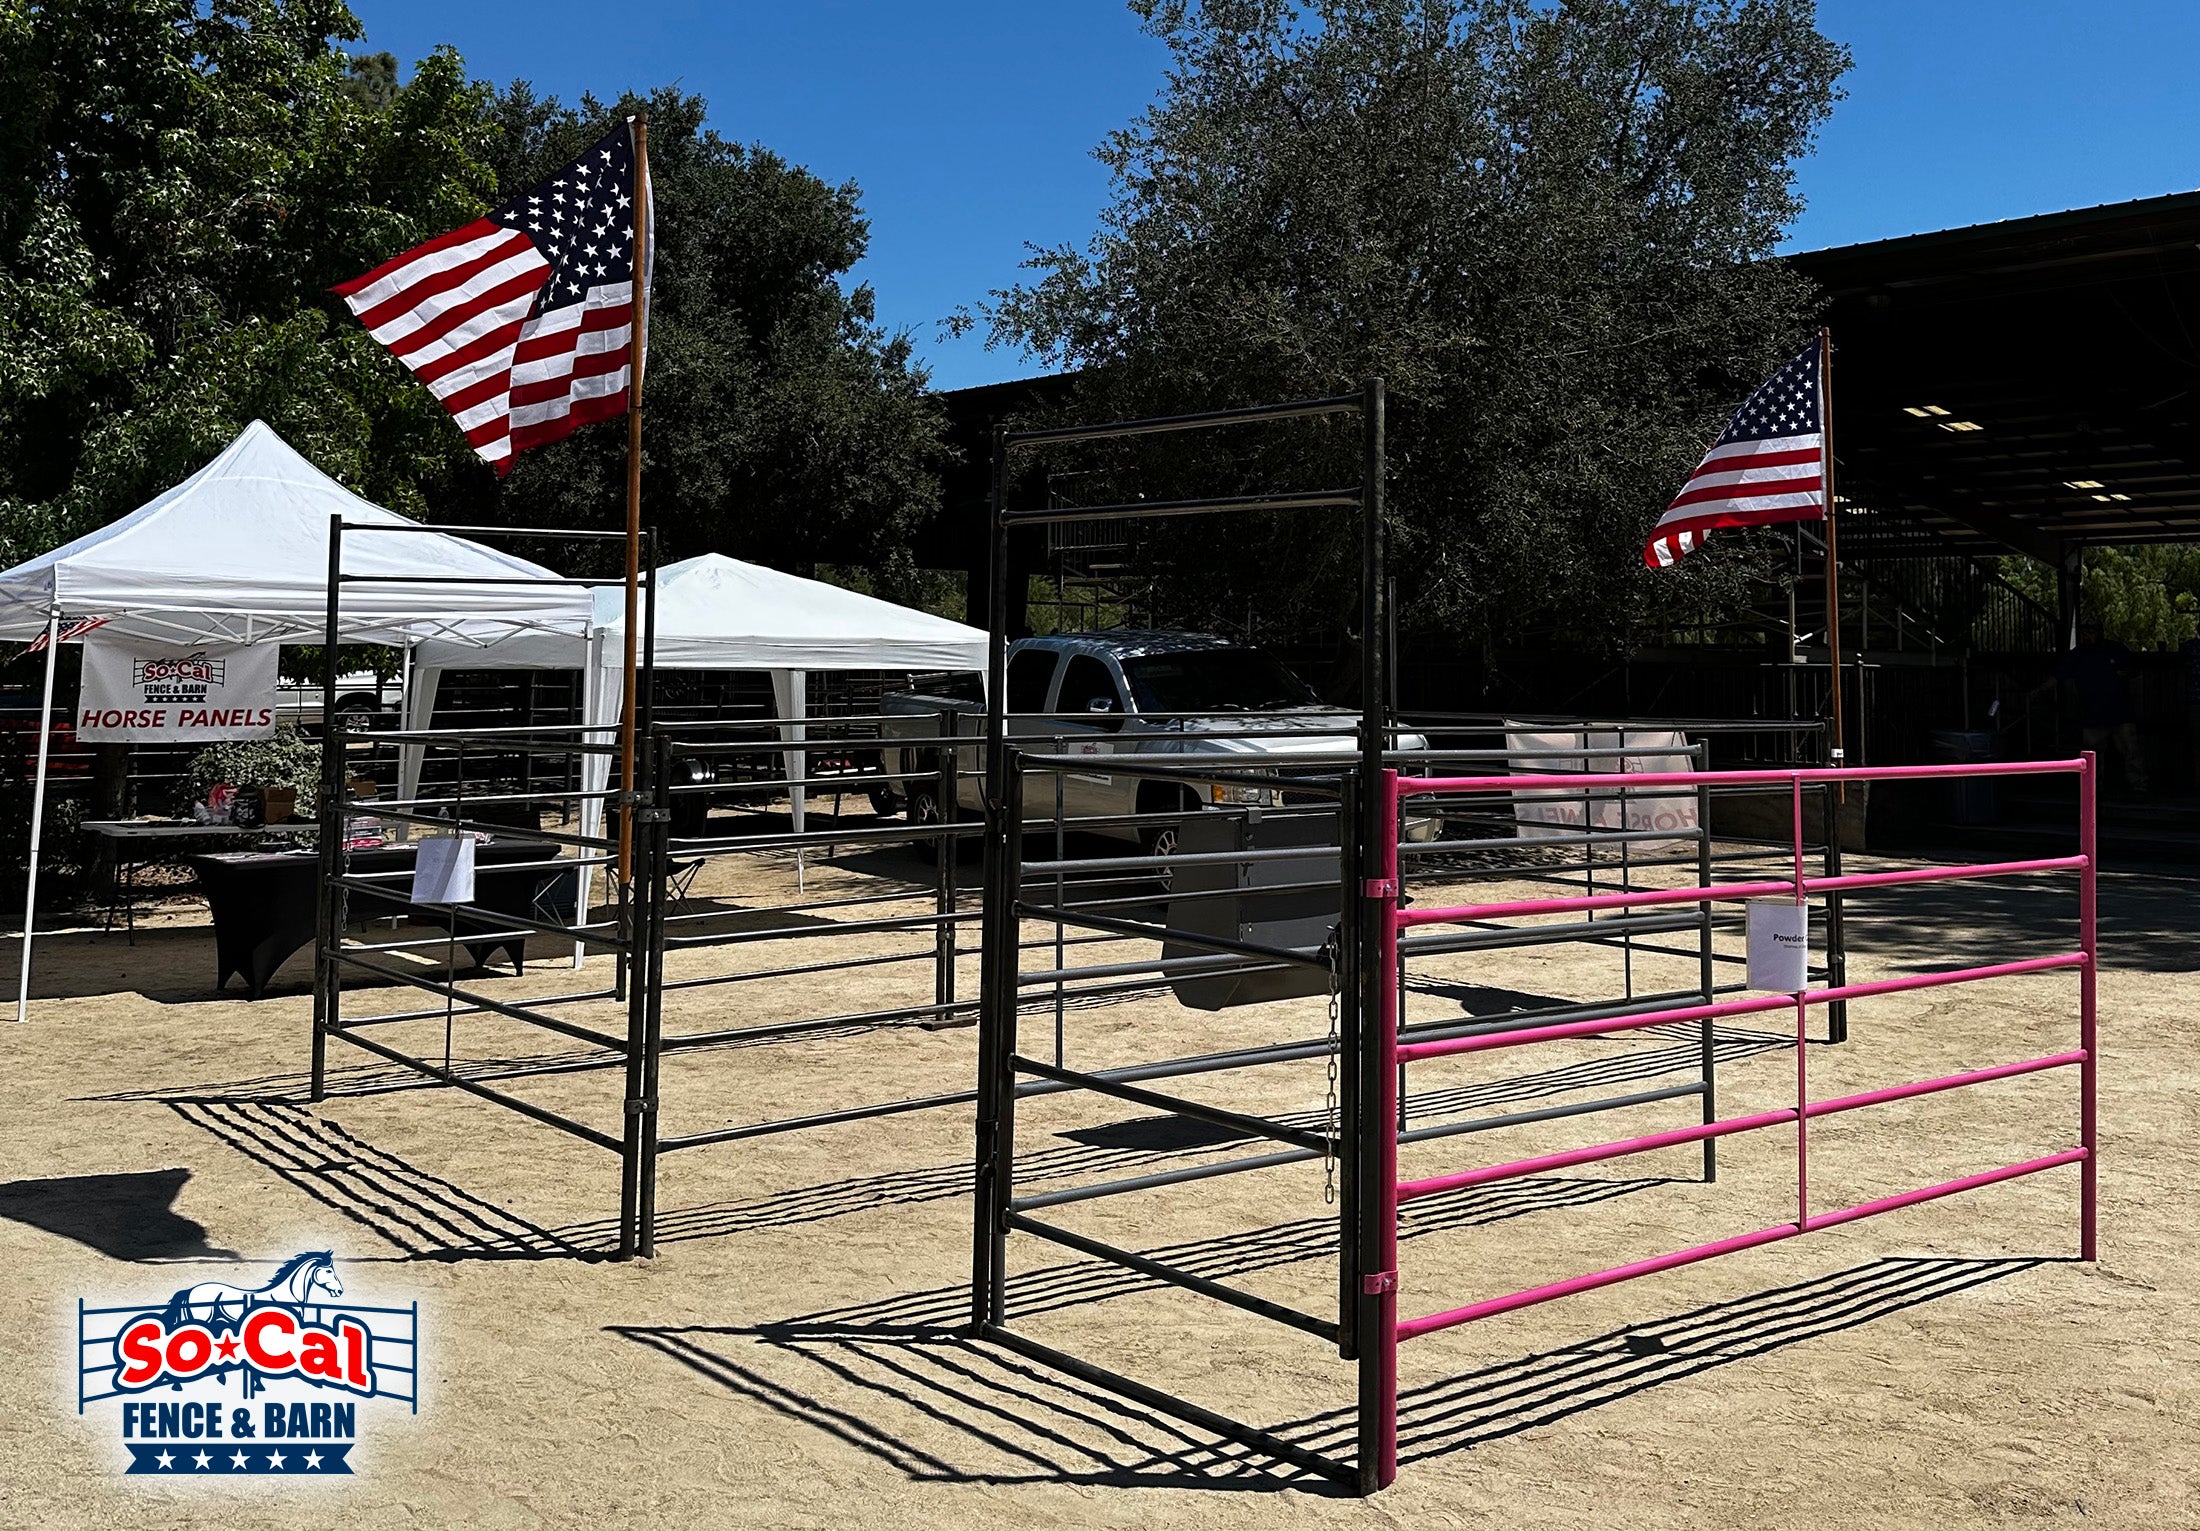 socal fence and barn vendor booth